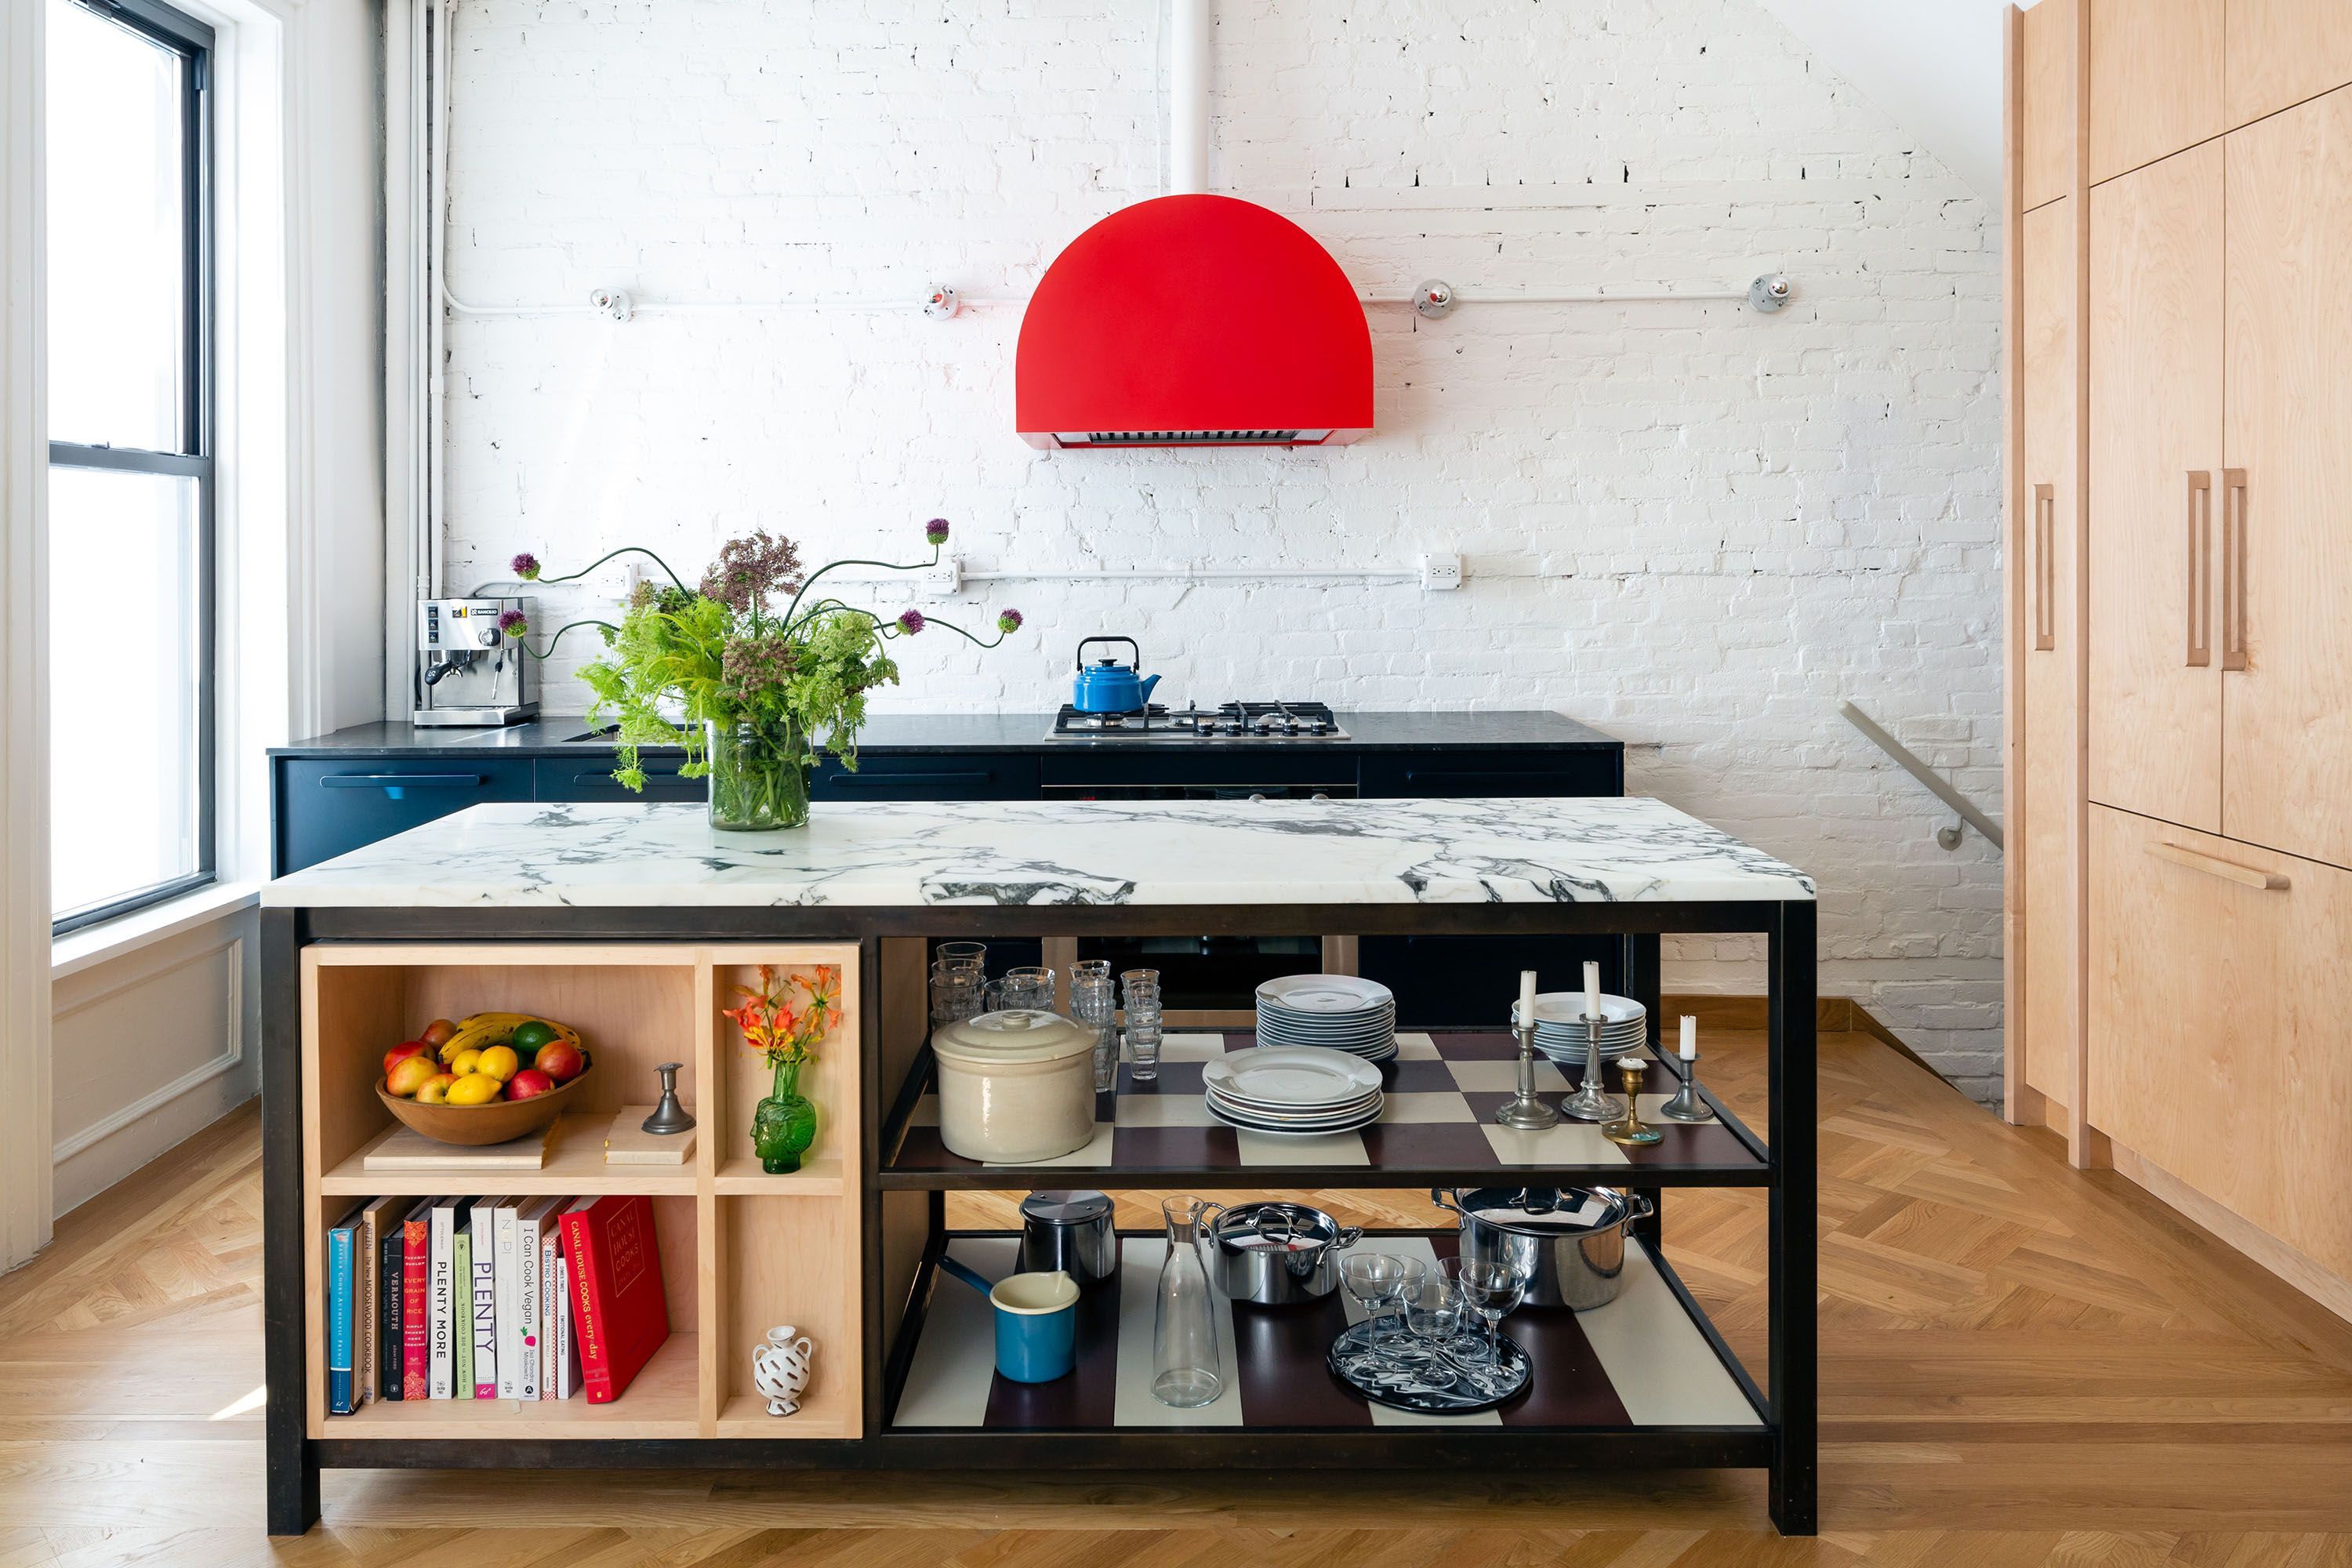 18 Small Kitchen Ideas to Make the Most of Your Cooking Space